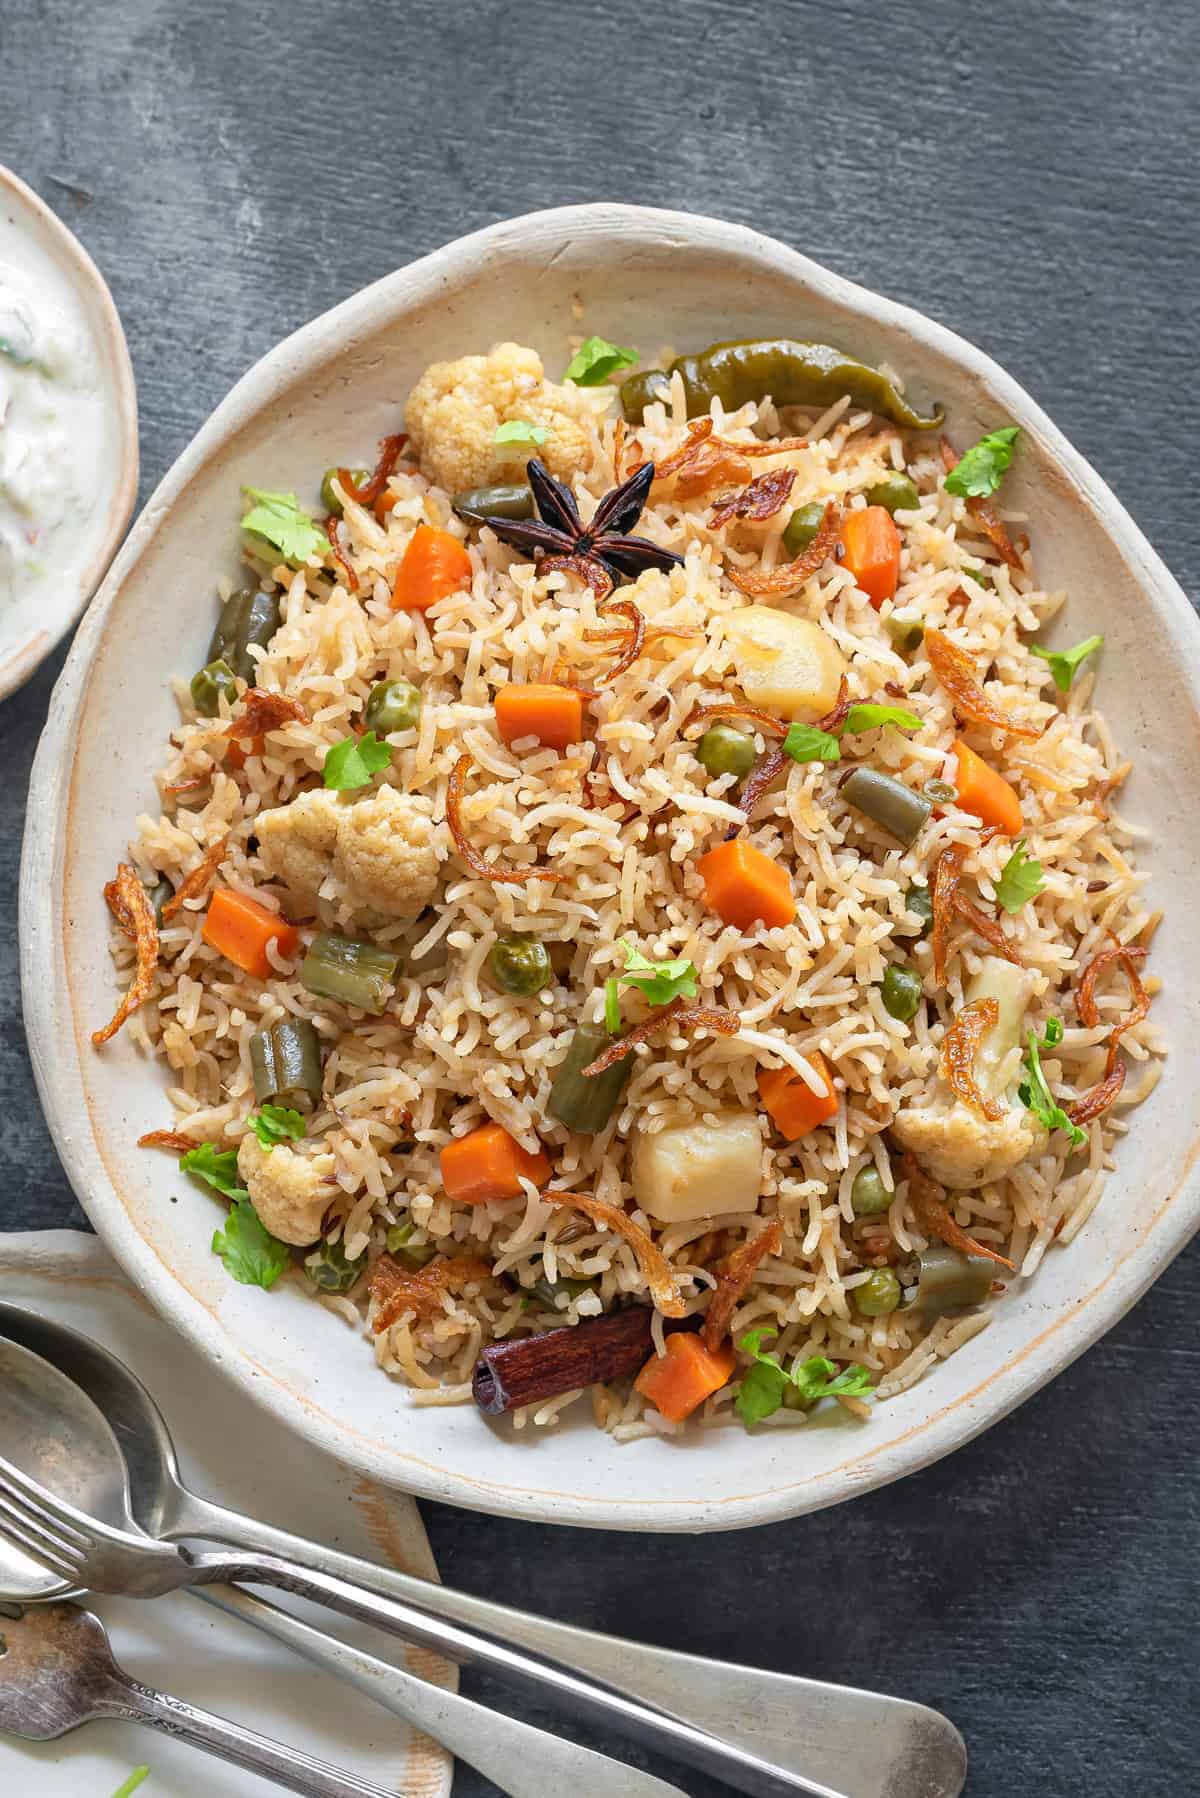 Wednesday Special Pulav Offer